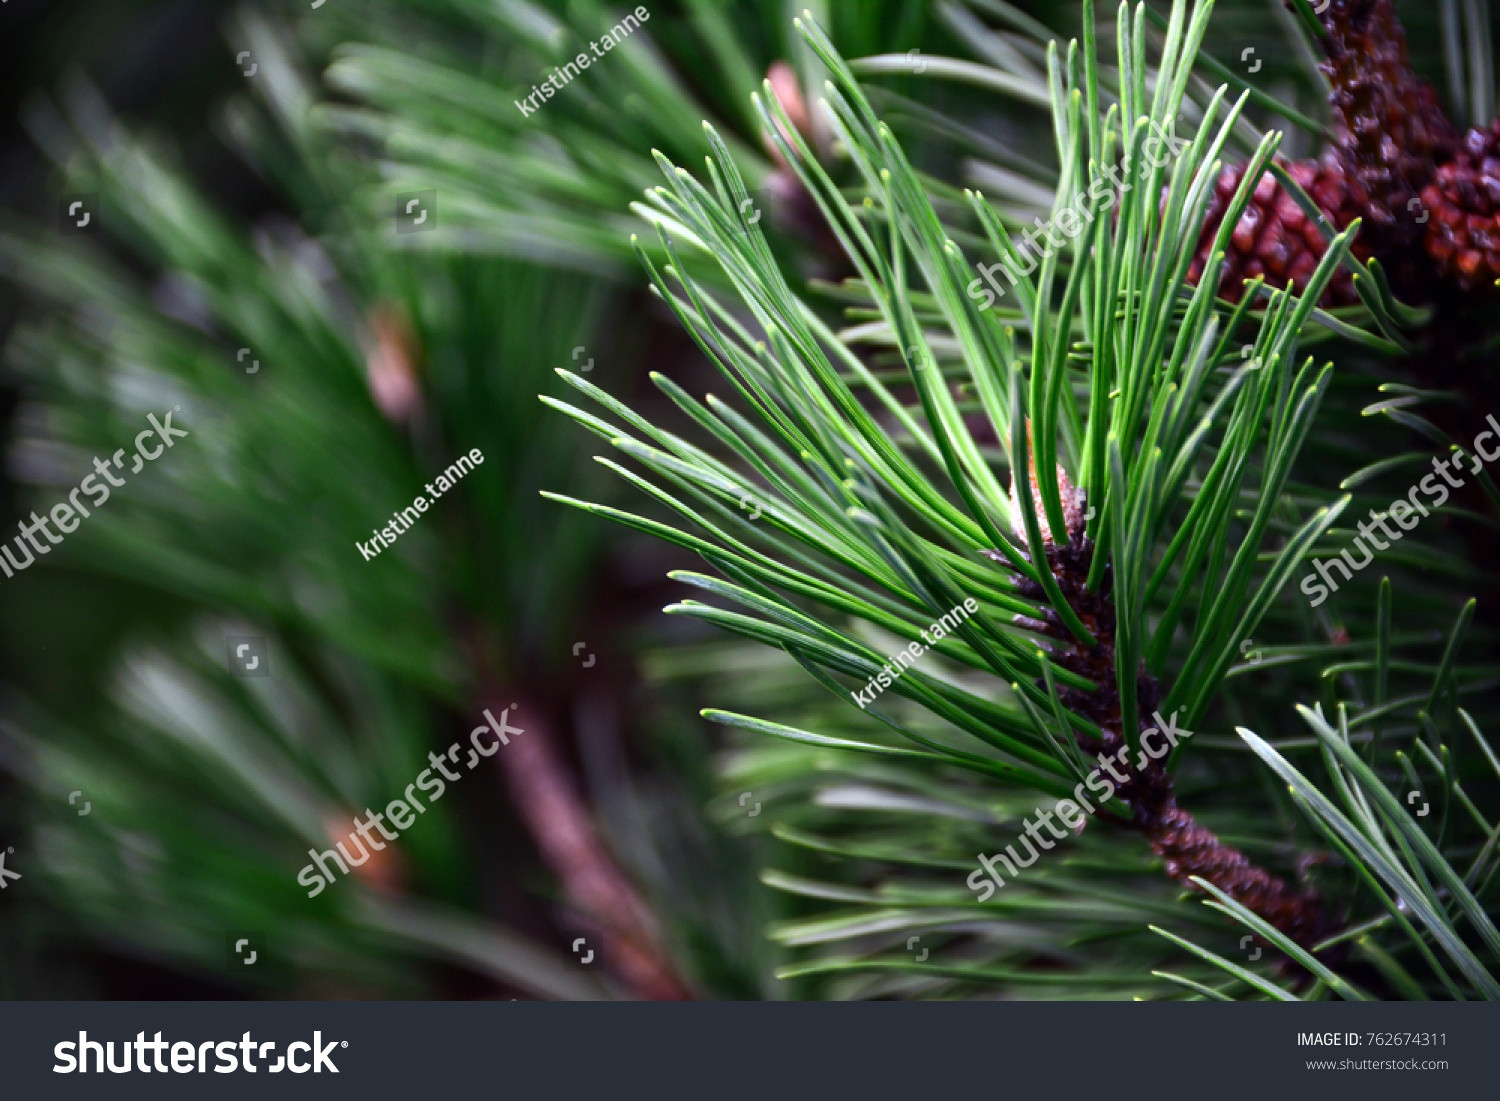 Closeup photo of green needle pine tree on the right side of picture. Small pine cones at the end of branches. Blurred pine needles in background
 #762674311